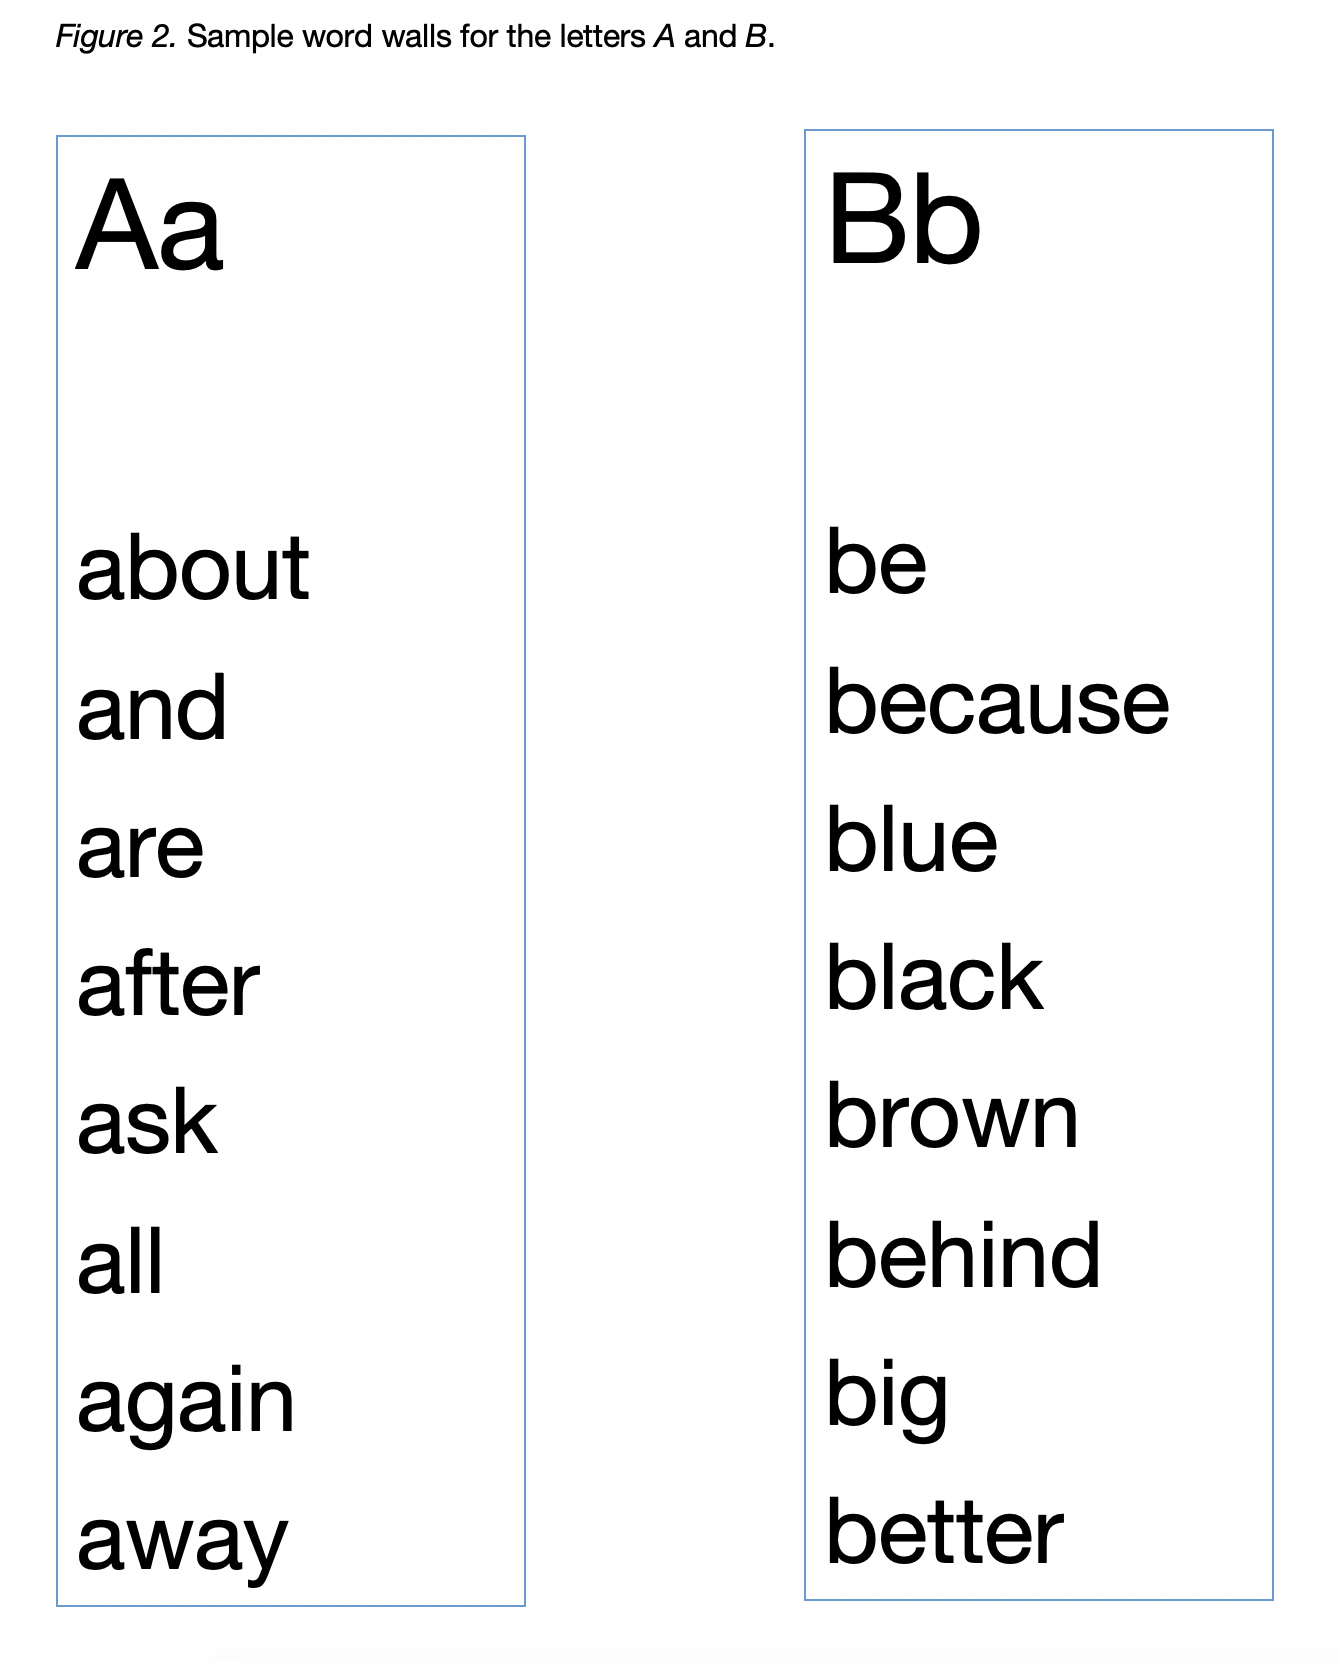 Sample word walls for letters A and B